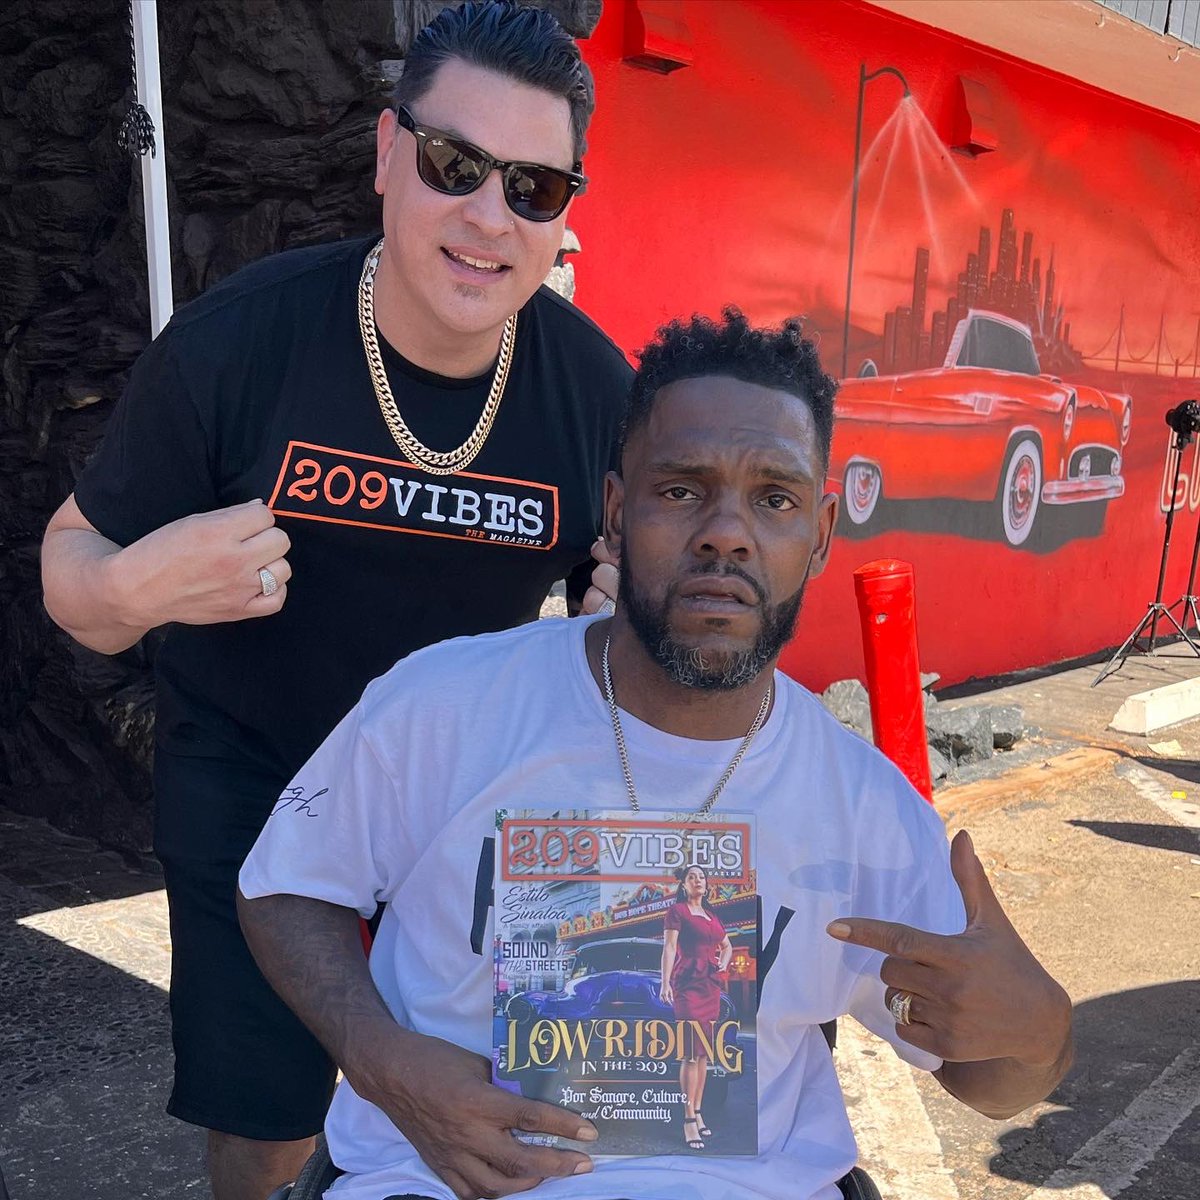 @KeakDaSneak is a really laid back guy. I appreciate him coming out to support our event today at Modesto Car Toys to raise money for the family of a 209 tattoo legend who passed away and launch 209 Vibes magazine in Motown. It was hella hot but everyone still had fun. #modesto